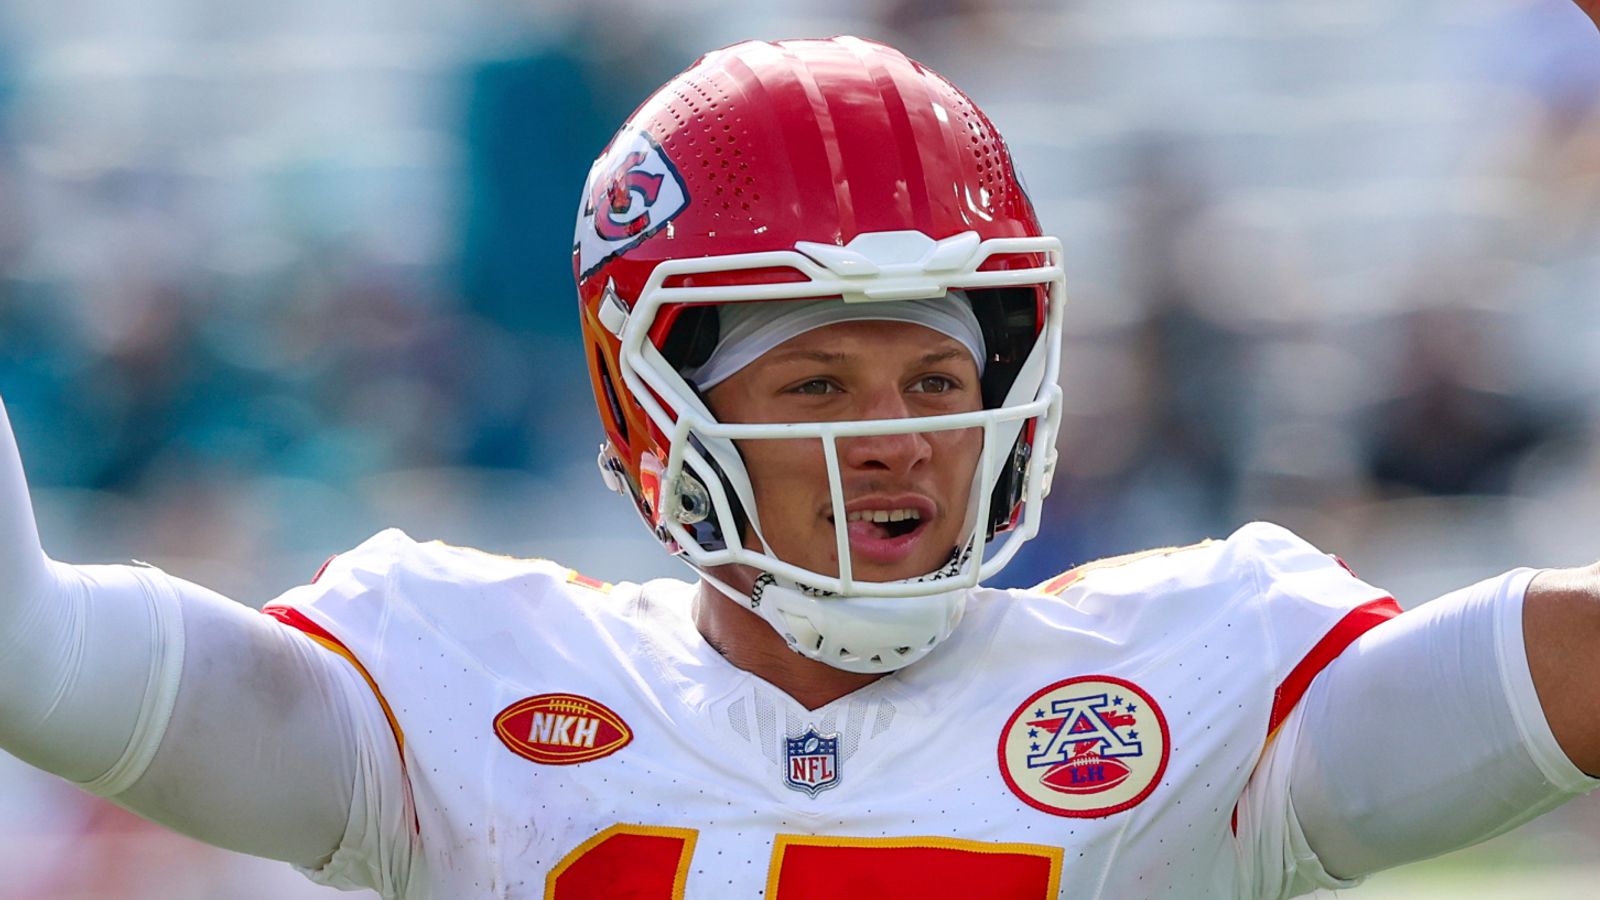 Patrick Mahomes' one-man show not enough in Chiefs' Super Bowl 55 loss